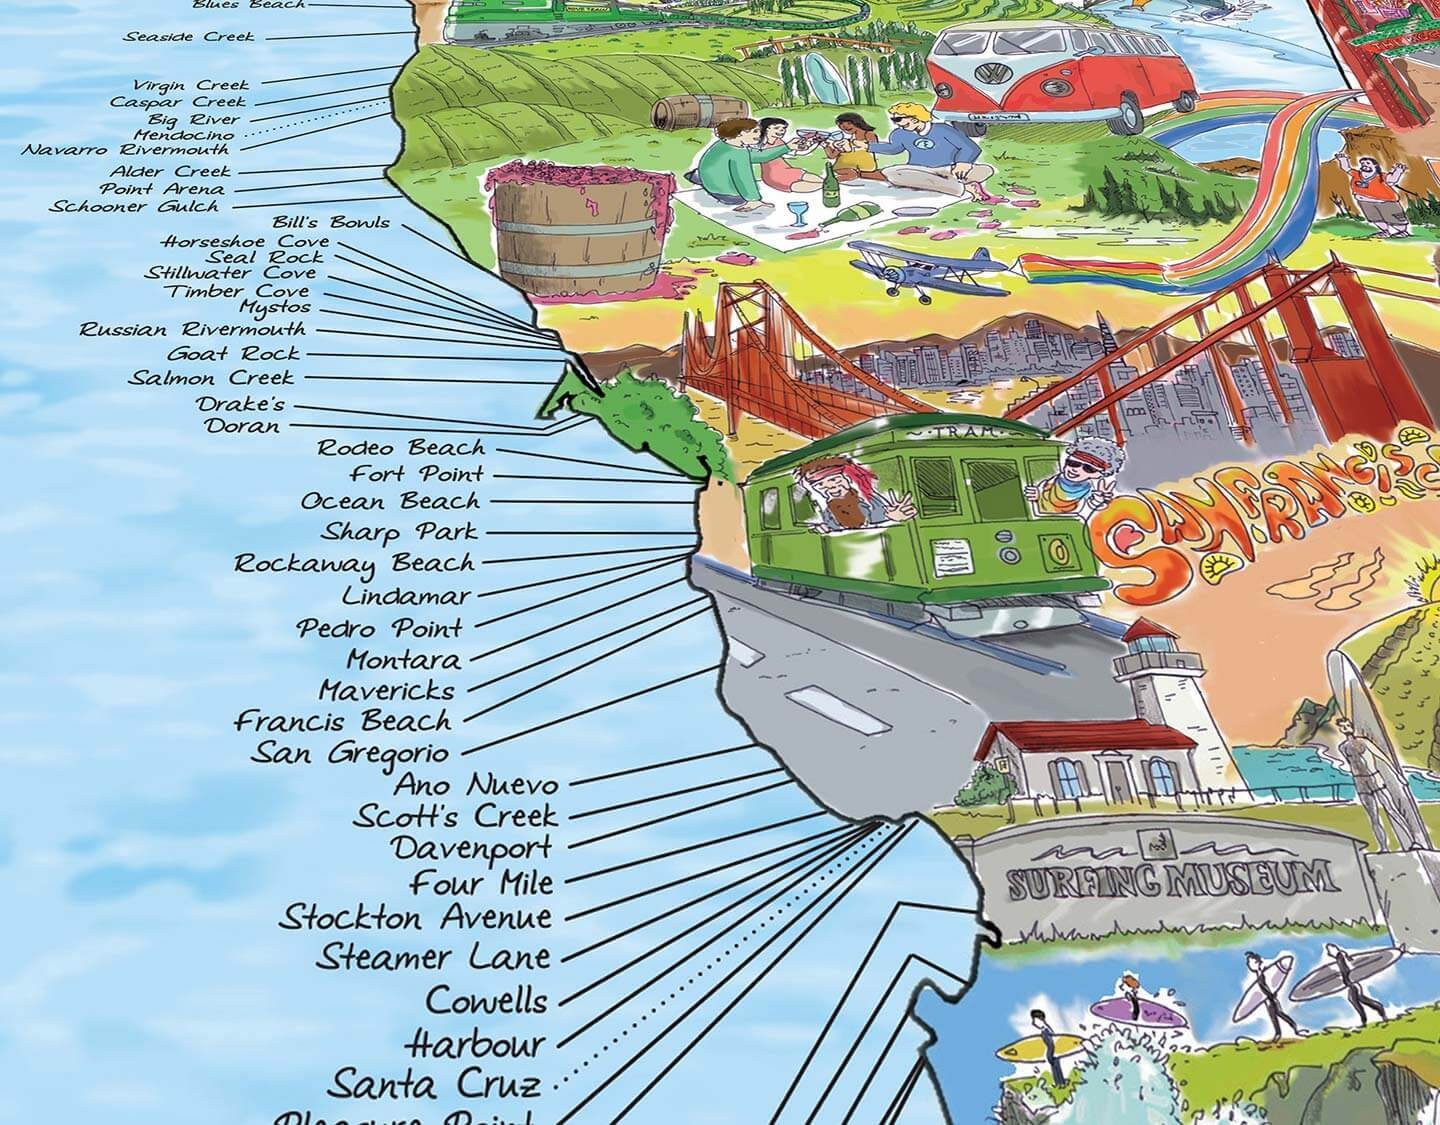 Awesome Maps - Poster West Coast USA Surf Spots Map